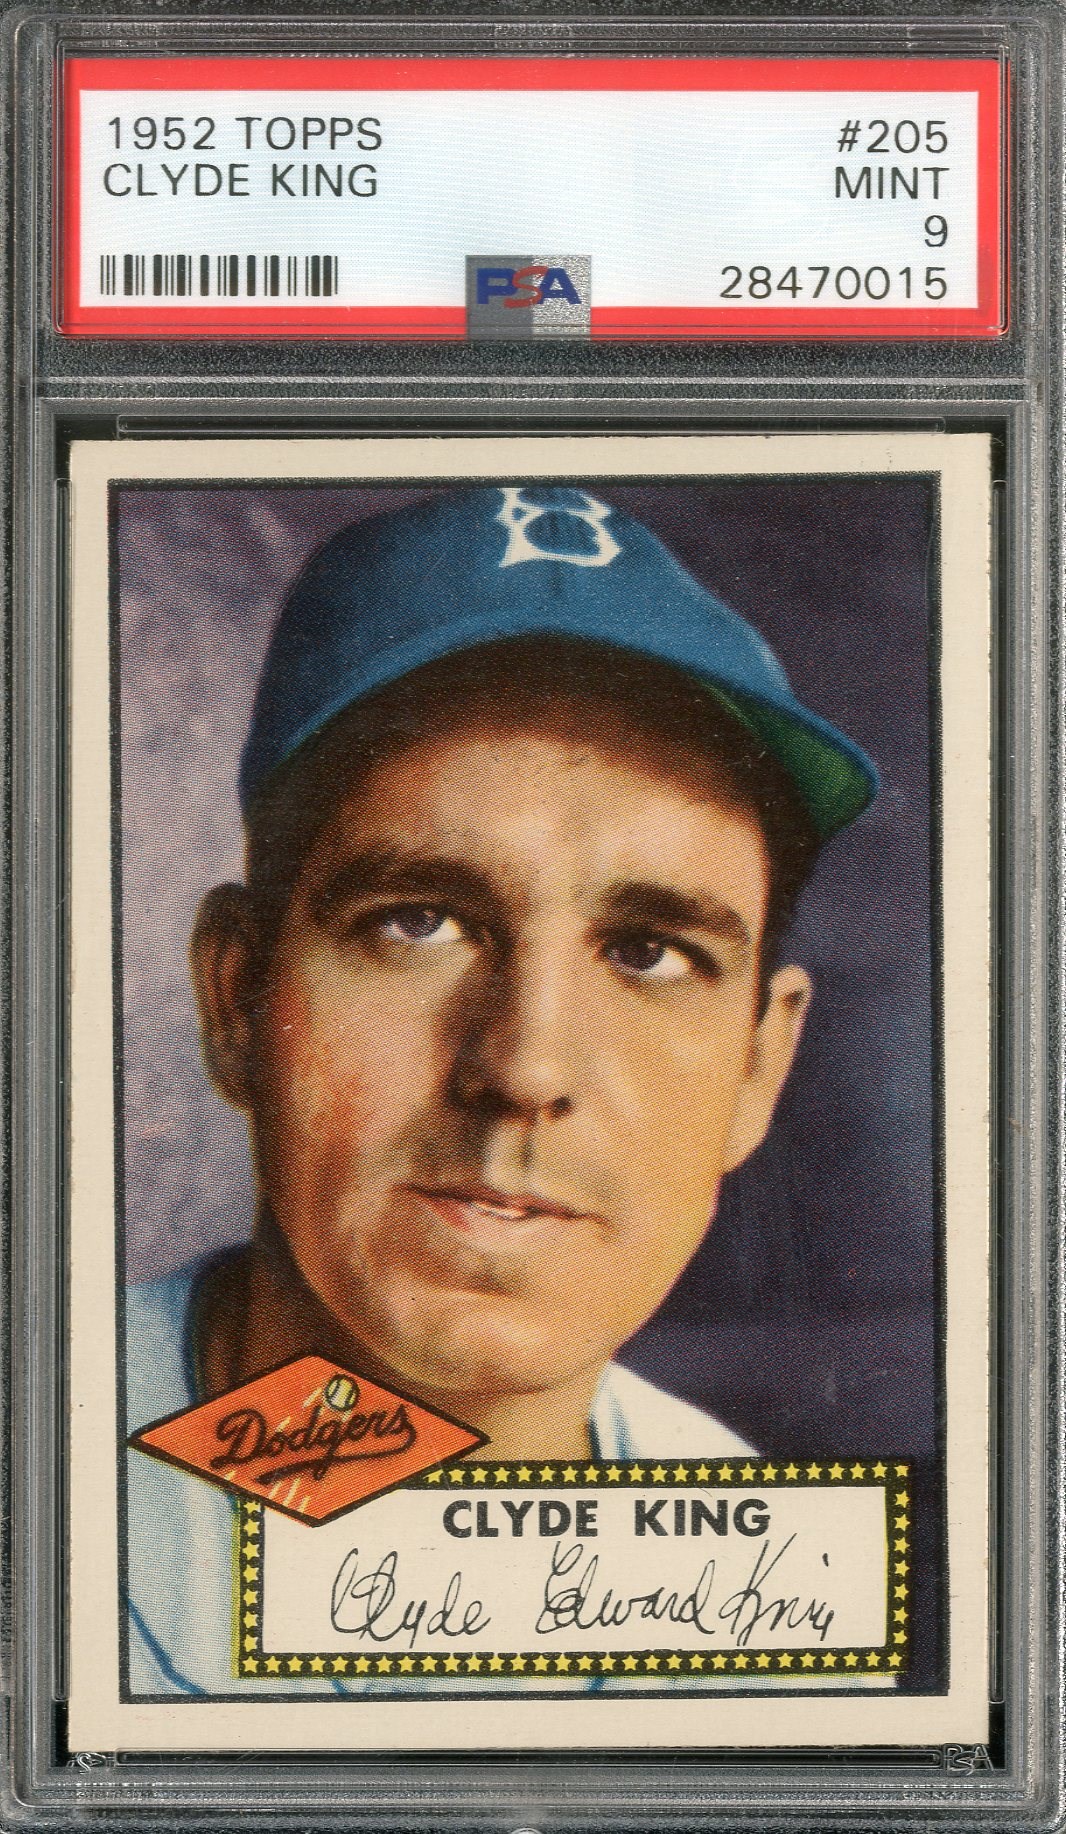 Baseball and Trading Cards - 1952 Topps #205 Clyde King - PSA MINT 9